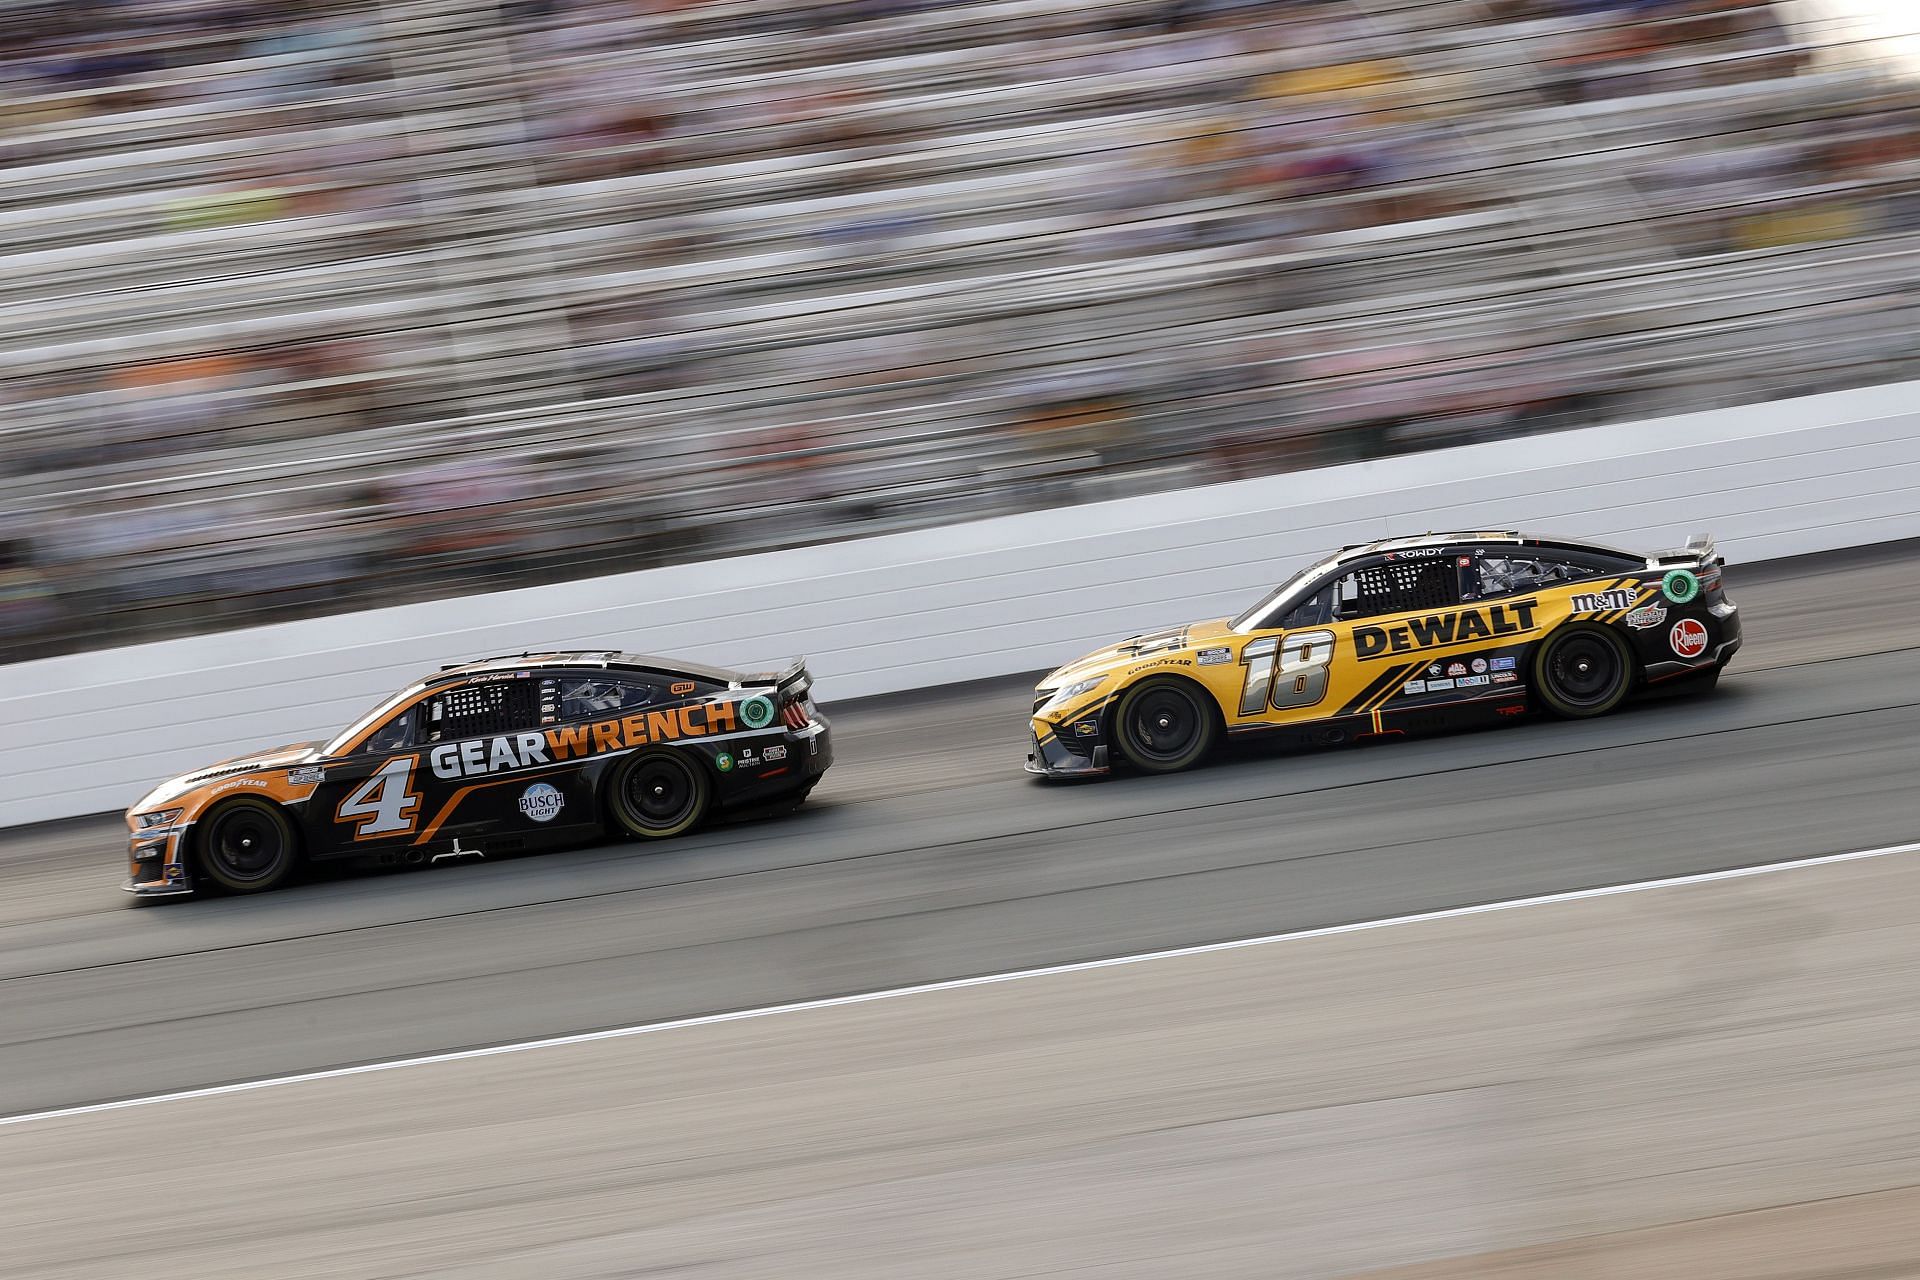 Kevin Harvick (#4 GEARWRENCH Ford) and Kyle Busch (#18 DeWalt Toyota) race during the 2022 NASCAR Cup Series Ambetter 301 at New Hampshire Motor Speedway in Loudon, New Hampshire (Photo by Tim Nwachukwu/Getty Images)